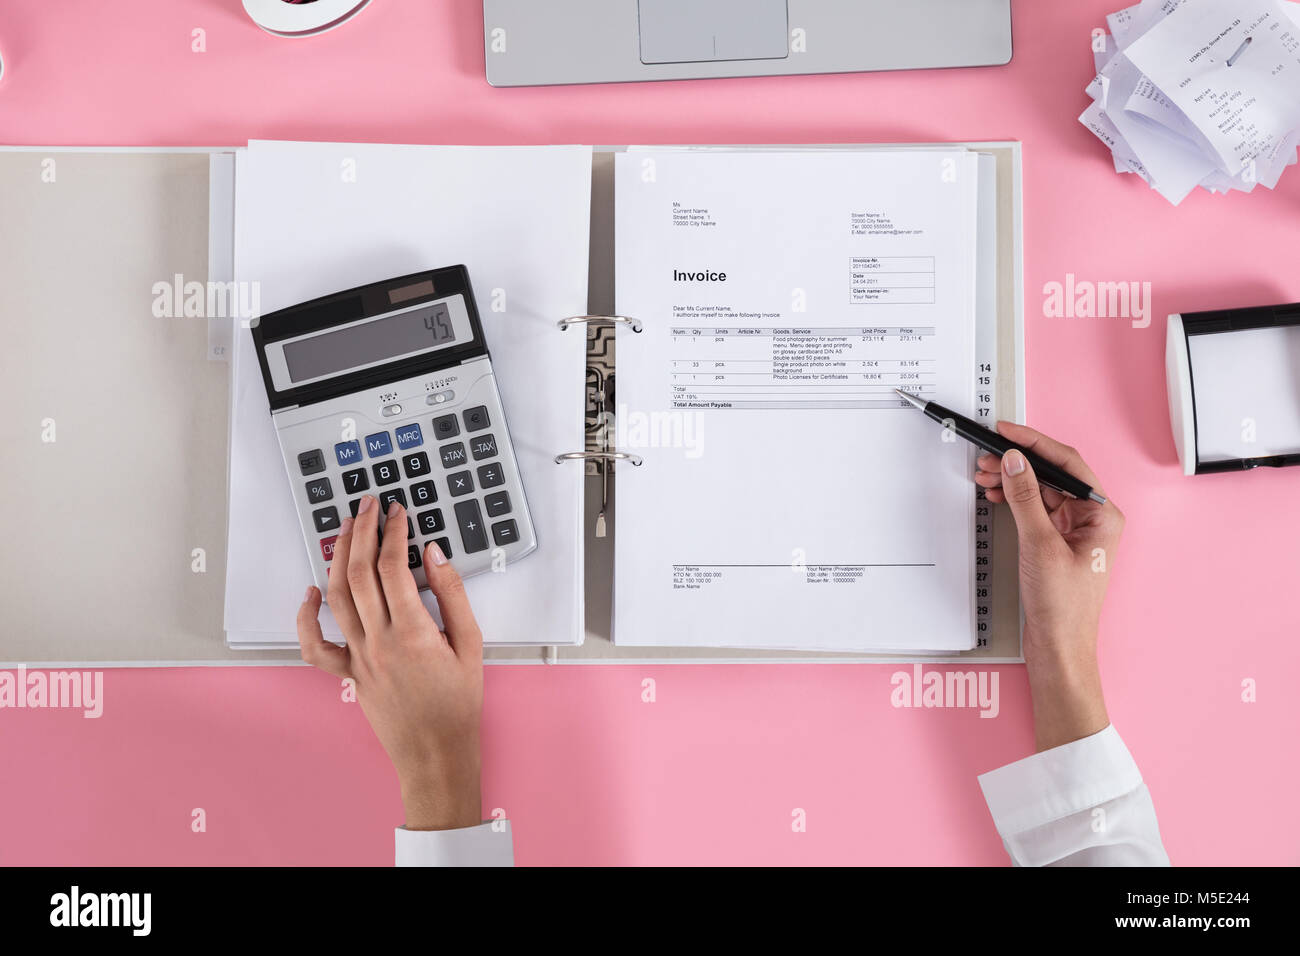 Close-up Of A Businesswoman Using Calculator While Calculating Invoice On Pink Desk Stock Photo